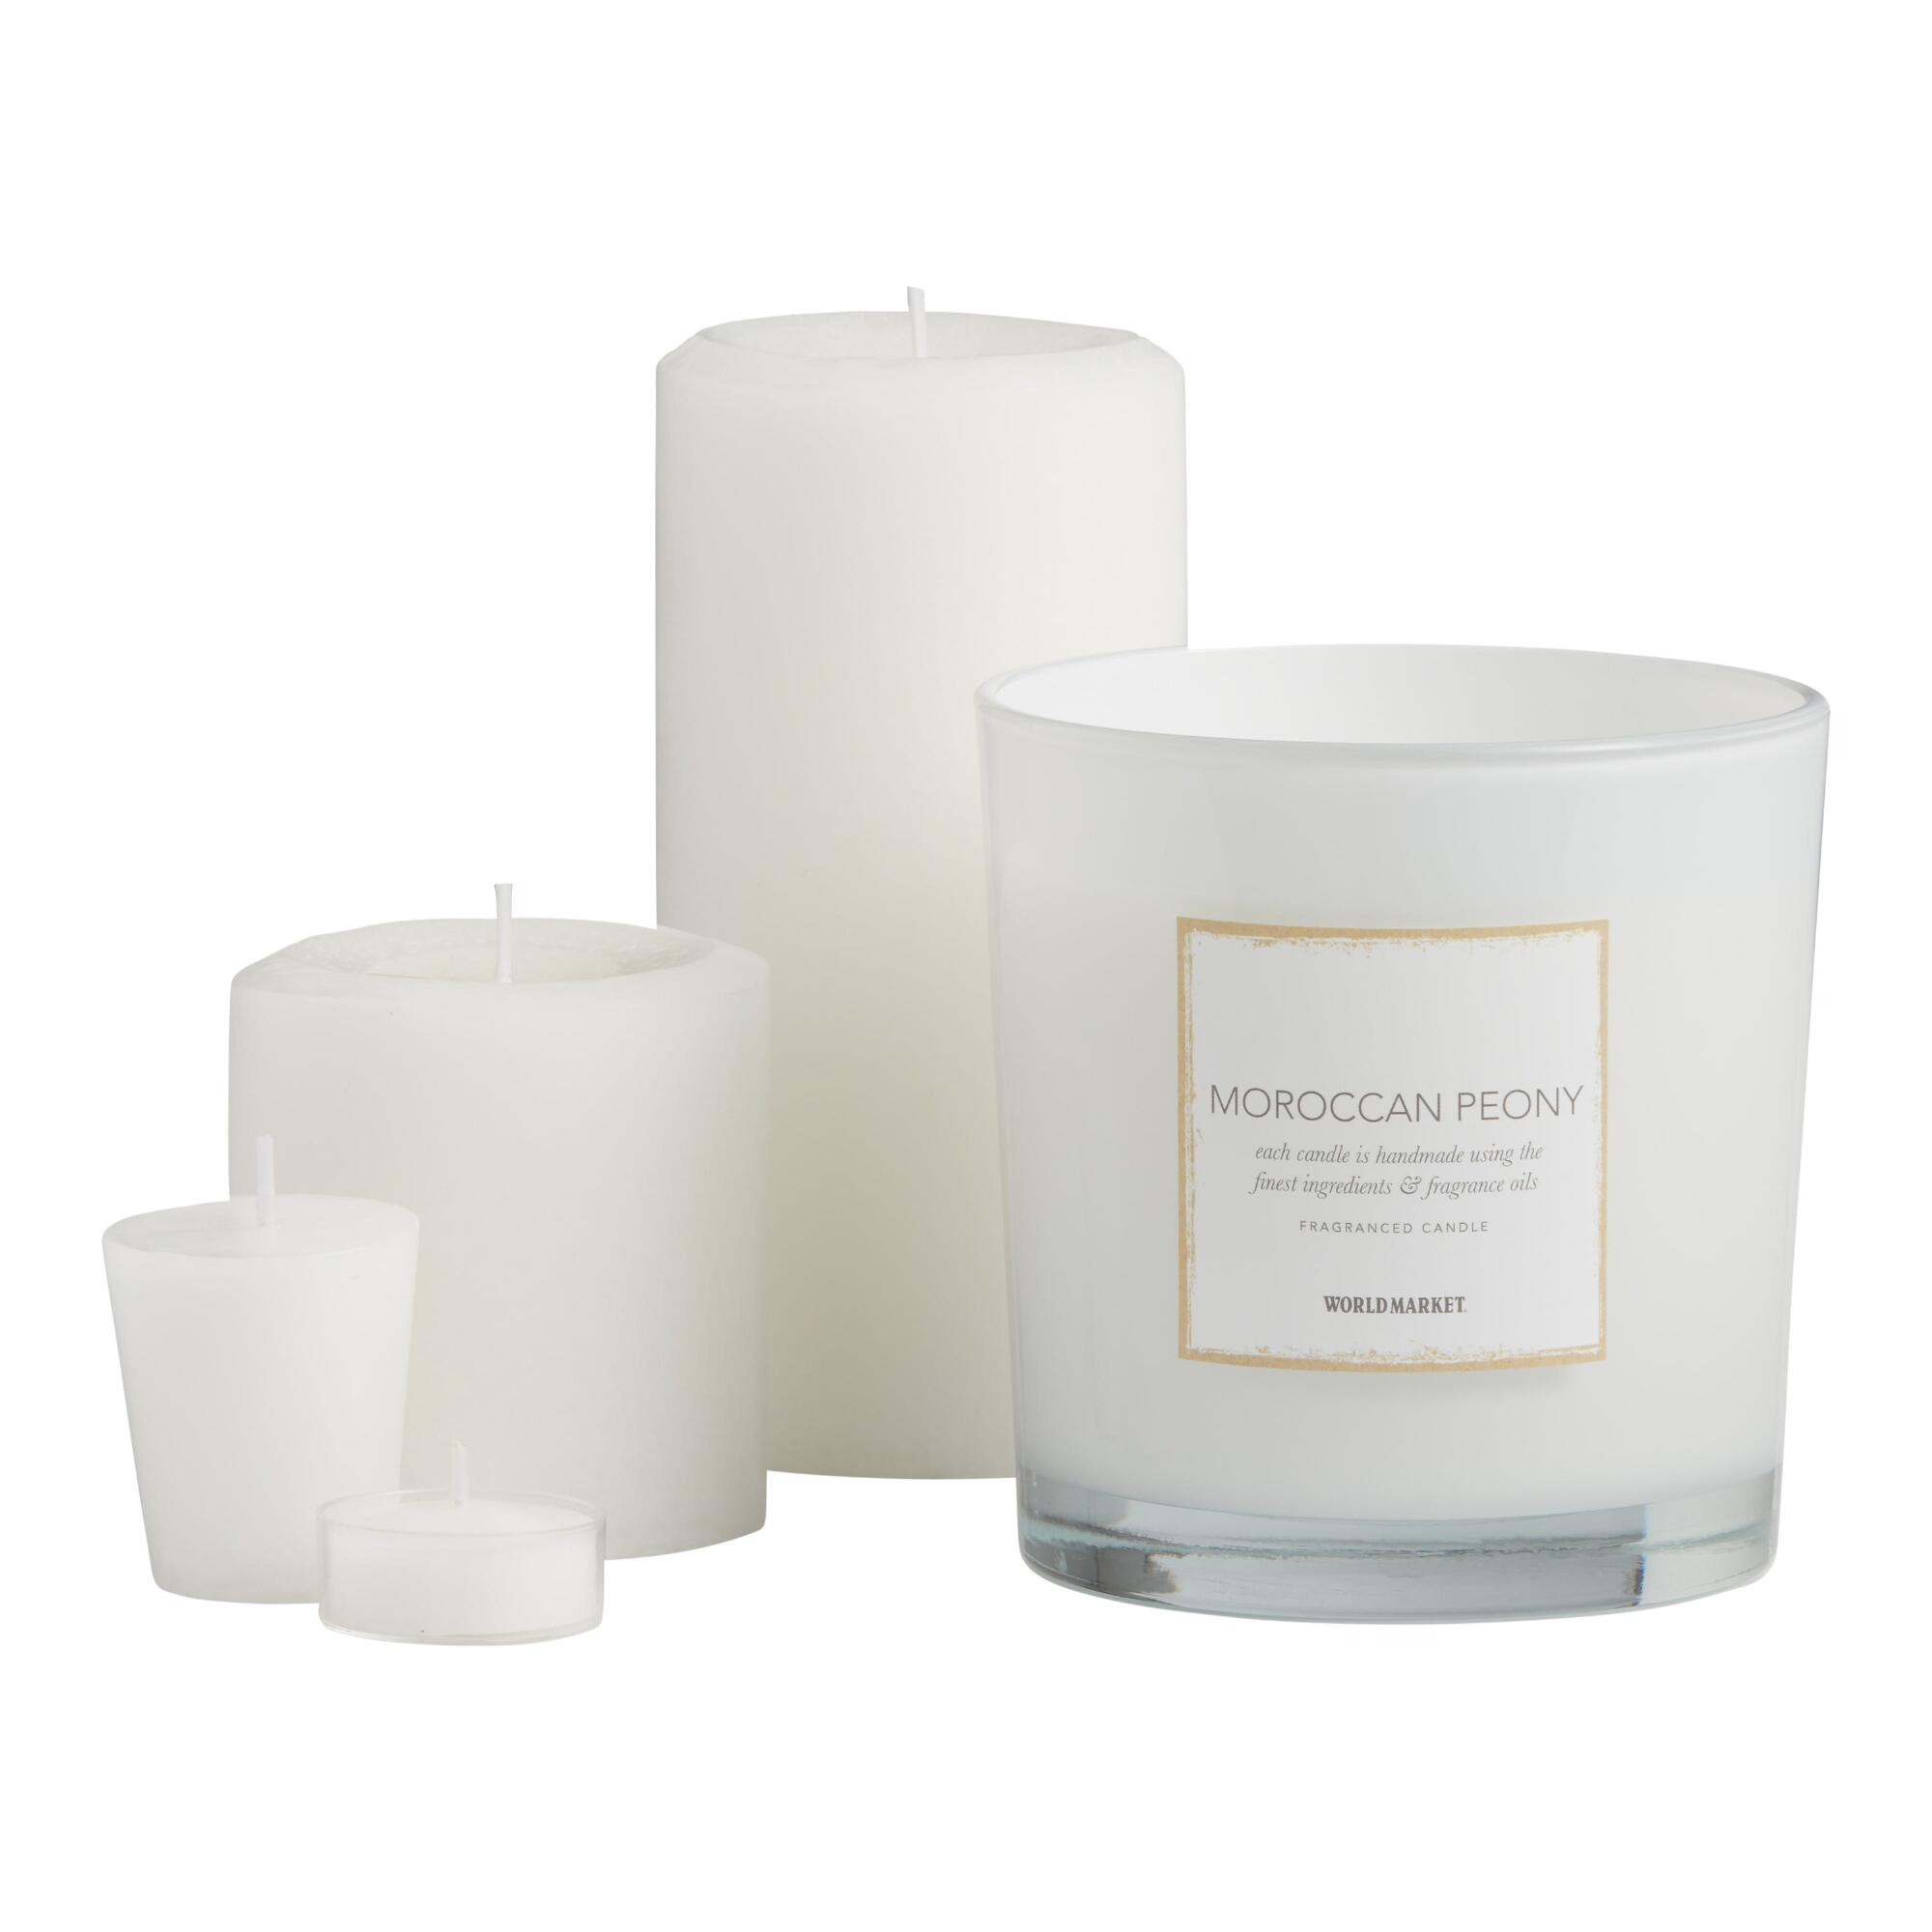 Moroccan Peony Scented Candle Collection by World Market